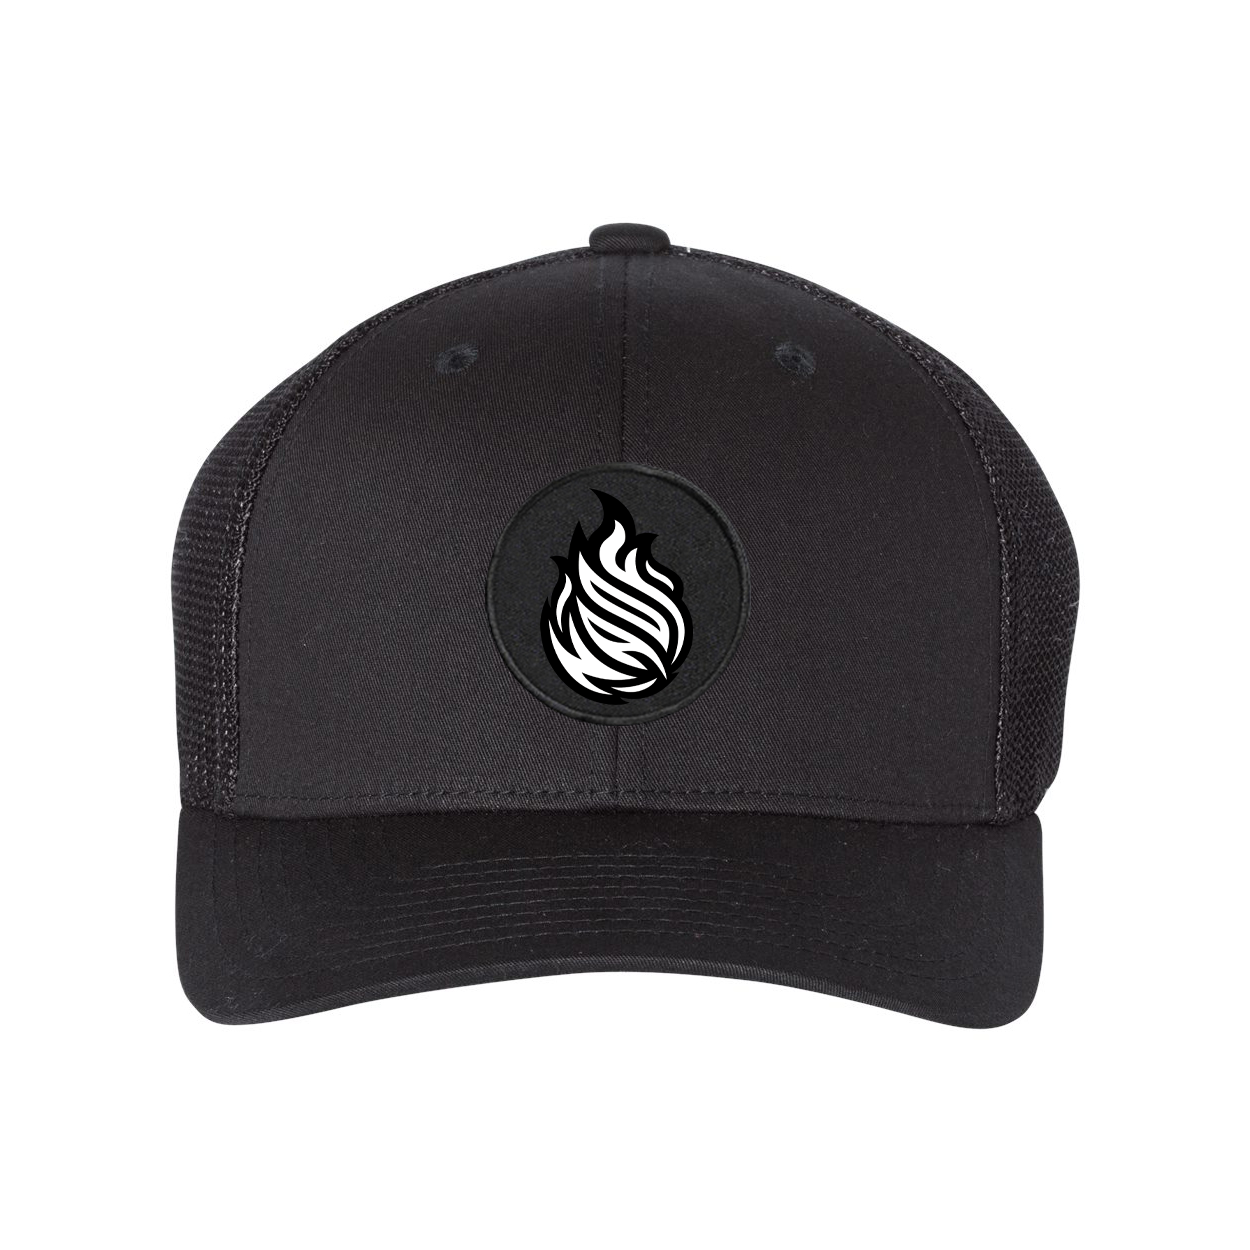 Near An Open Flame Classic Woven Circle Patch Snapback Trucker Hat Black (White Logo)